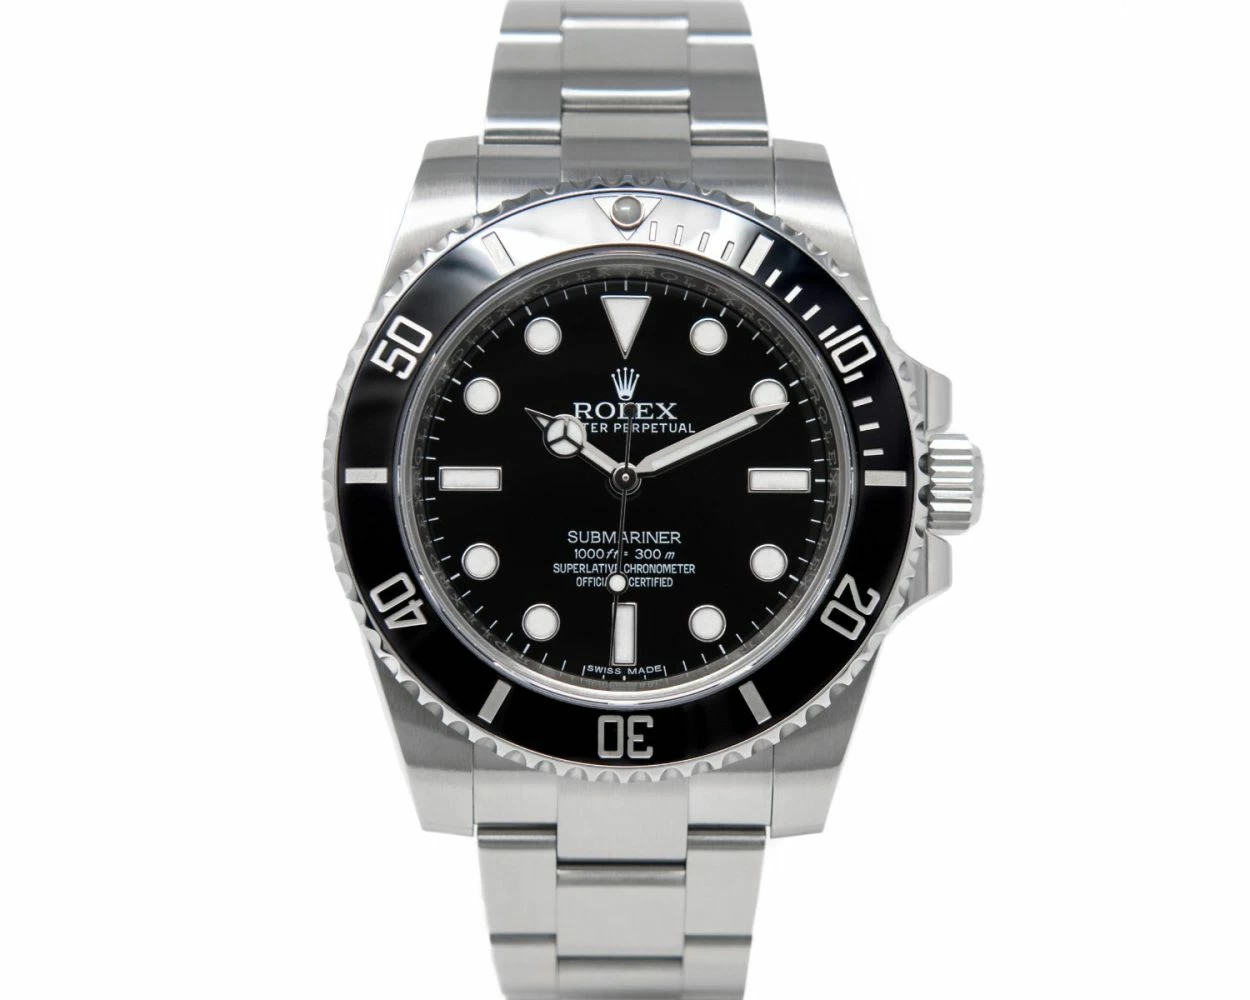 Rolex Submariner Pre Owned Watch Ref 114060 - Mens